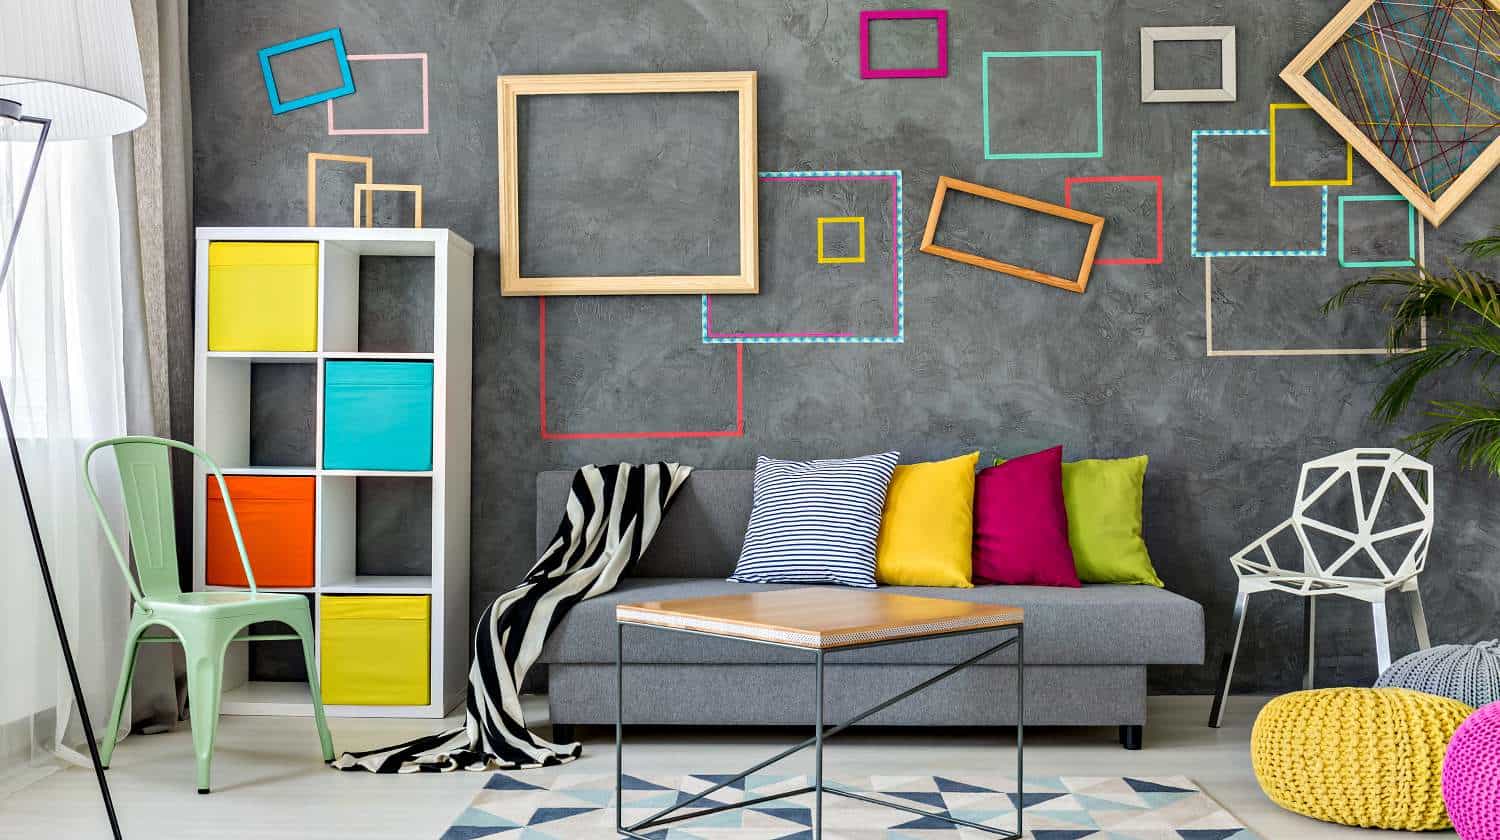 17 Wall decoration DIY ideas for an instant makeover (+5 mins DIY)